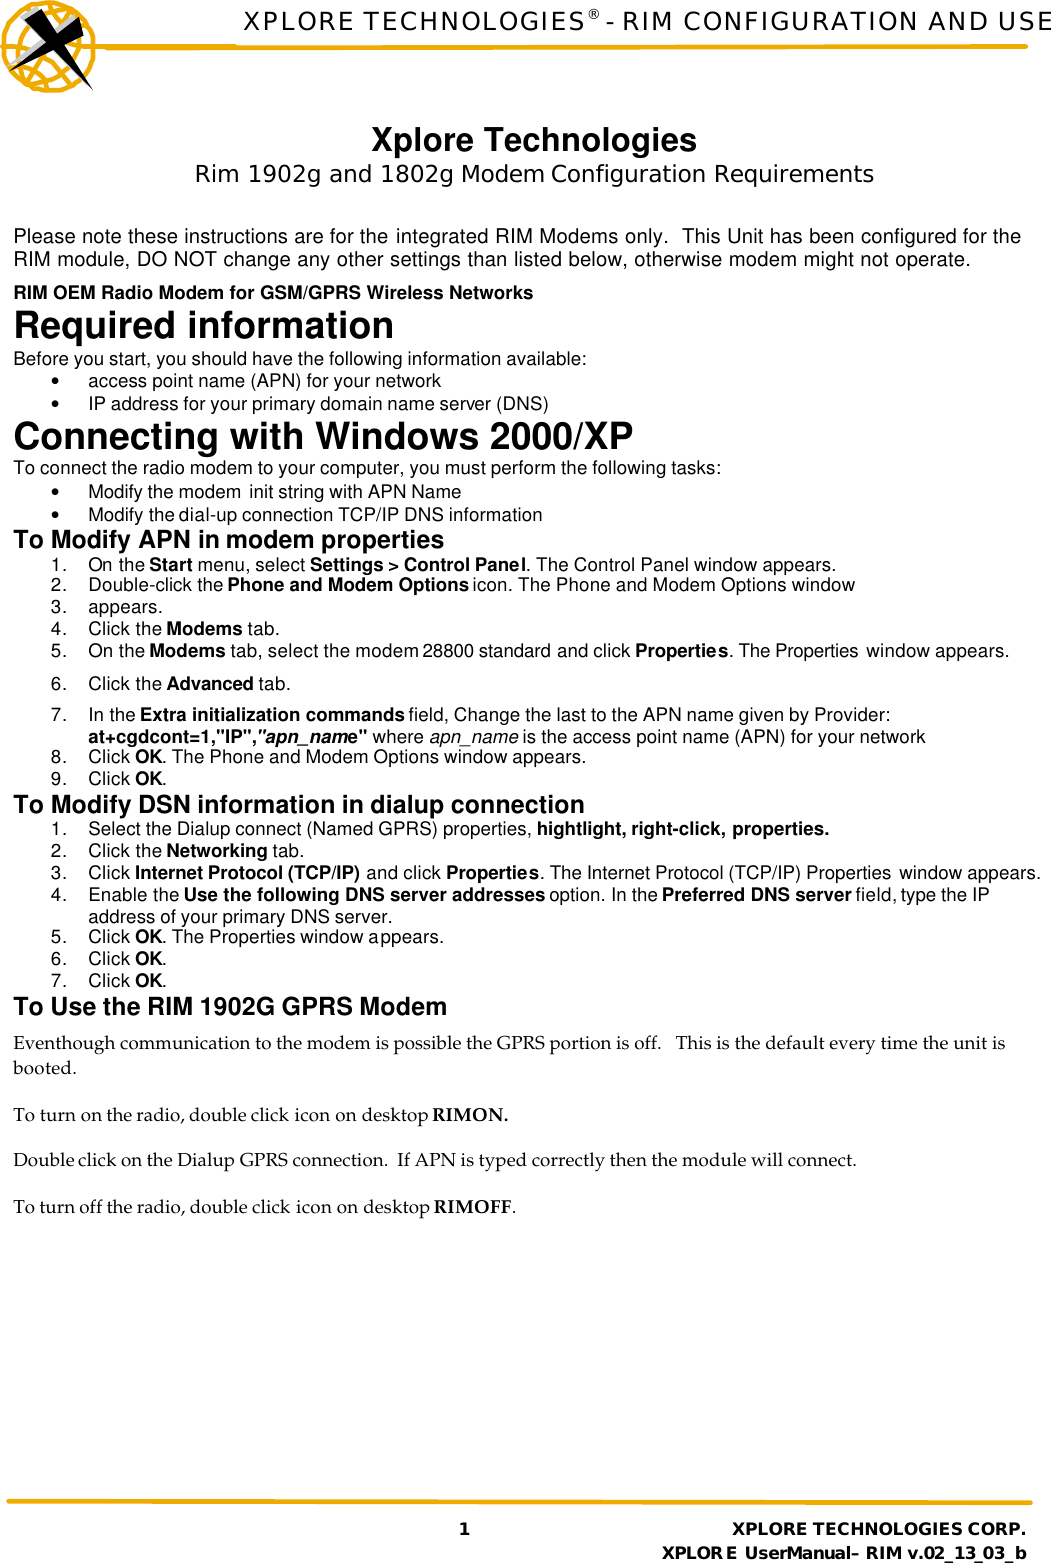 XPLORE TECHNOLOGIES® - RIM CONFIGURATION AND USE     1 XPLORE TECHNOLOGIES CORP.     XPLORE UserManual– RIM v.02_13_03_b Xplore Technologies  Rim 1902g and 1802g Modem Configuration Requirements  Please note these instructions are for the integrated RIM Modems only.  This Unit has been configured for the RIM module, DO NOT change any other settings than listed below, otherwise modem might not operate. RIM OEM Radio Modem for GSM/GPRS Wireless Networks Required information Before you start, you should have the following information available: • access point name (APN) for your network • IP address for your primary domain name server (DNS) Connecting with Windows 2000/XP To connect the radio modem to your computer, you must perform the following tasks: • Modify the modem  init string with APN Name • Modify the dial-up connection TCP/IP DNS information To Modify APN in modem properties 1. On the Start menu, select Settings &gt; Control Panel. The Control Panel window appears. 2. Double-click the Phone and Modem Options icon. The Phone and Modem Options window 3. appears. 4. Click the Modems tab. 5. On the Modems tab, select the modem 28800 standard and click Properties. The Properties  window appears. 6. Click the Advanced tab. 7. In the Extra initialization commands field, Change the last to the APN name given by Provider: at+cgdcont=1,&quot;IP&quot;,&quot;apn_name&quot; where apn_name is the access point name (APN) for your network 8. Click OK. The Phone and Modem Options window appears. 9. Click OK. To Modify DSN information in dialup connection 1. Select the Dialup connect (Named GPRS) properties, hightlight, right-click, properties. 2. Click the Networking tab. 3. Click Internet Protocol (TCP/IP) and click Properties. The Internet Protocol (TCP/IP) Properties  window appears. 4. Enable the Use the following DNS server addresses option. In the Preferred DNS server field, type the IP address of your primary DNS server. 5. Click OK. The Properties window appears. 6. Click OK. 7. Click OK. To Use the RIM 1902G GPRS Modem Eventhough communication to the modem is possible the GPRS portion is off.   This is the default every time the unit is booted. To turn on the radio, double click icon on desktop RIMON. Double click on the Dialup GPRS connection.  If APN is typed correctly then the module will connect. To turn off the radio, double click icon on desktop RIMOFF.  